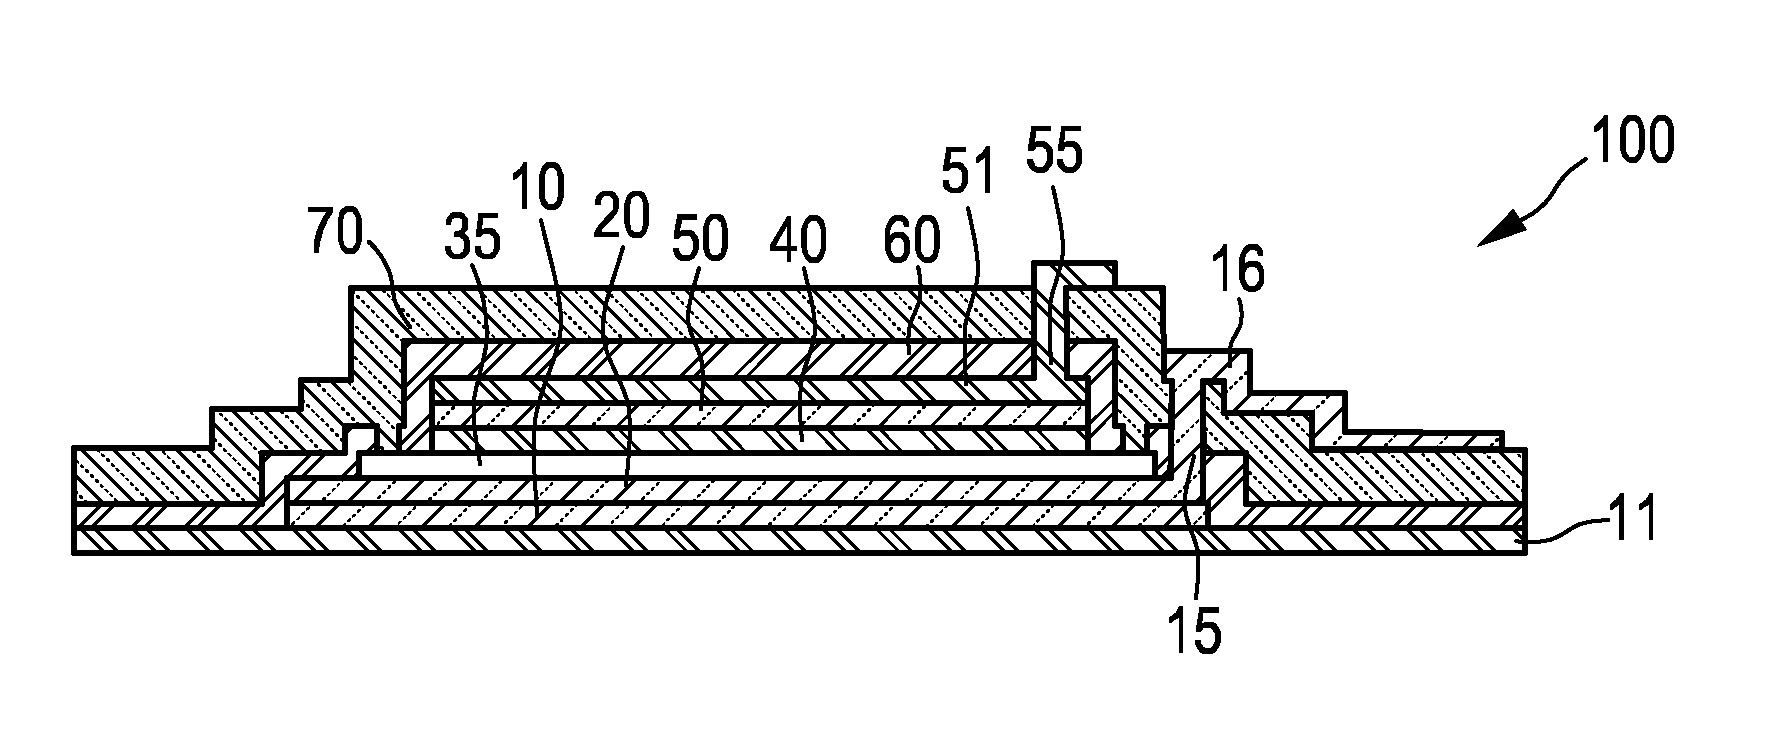 Capacitive micro-machined transducer and method of manufacturing the same